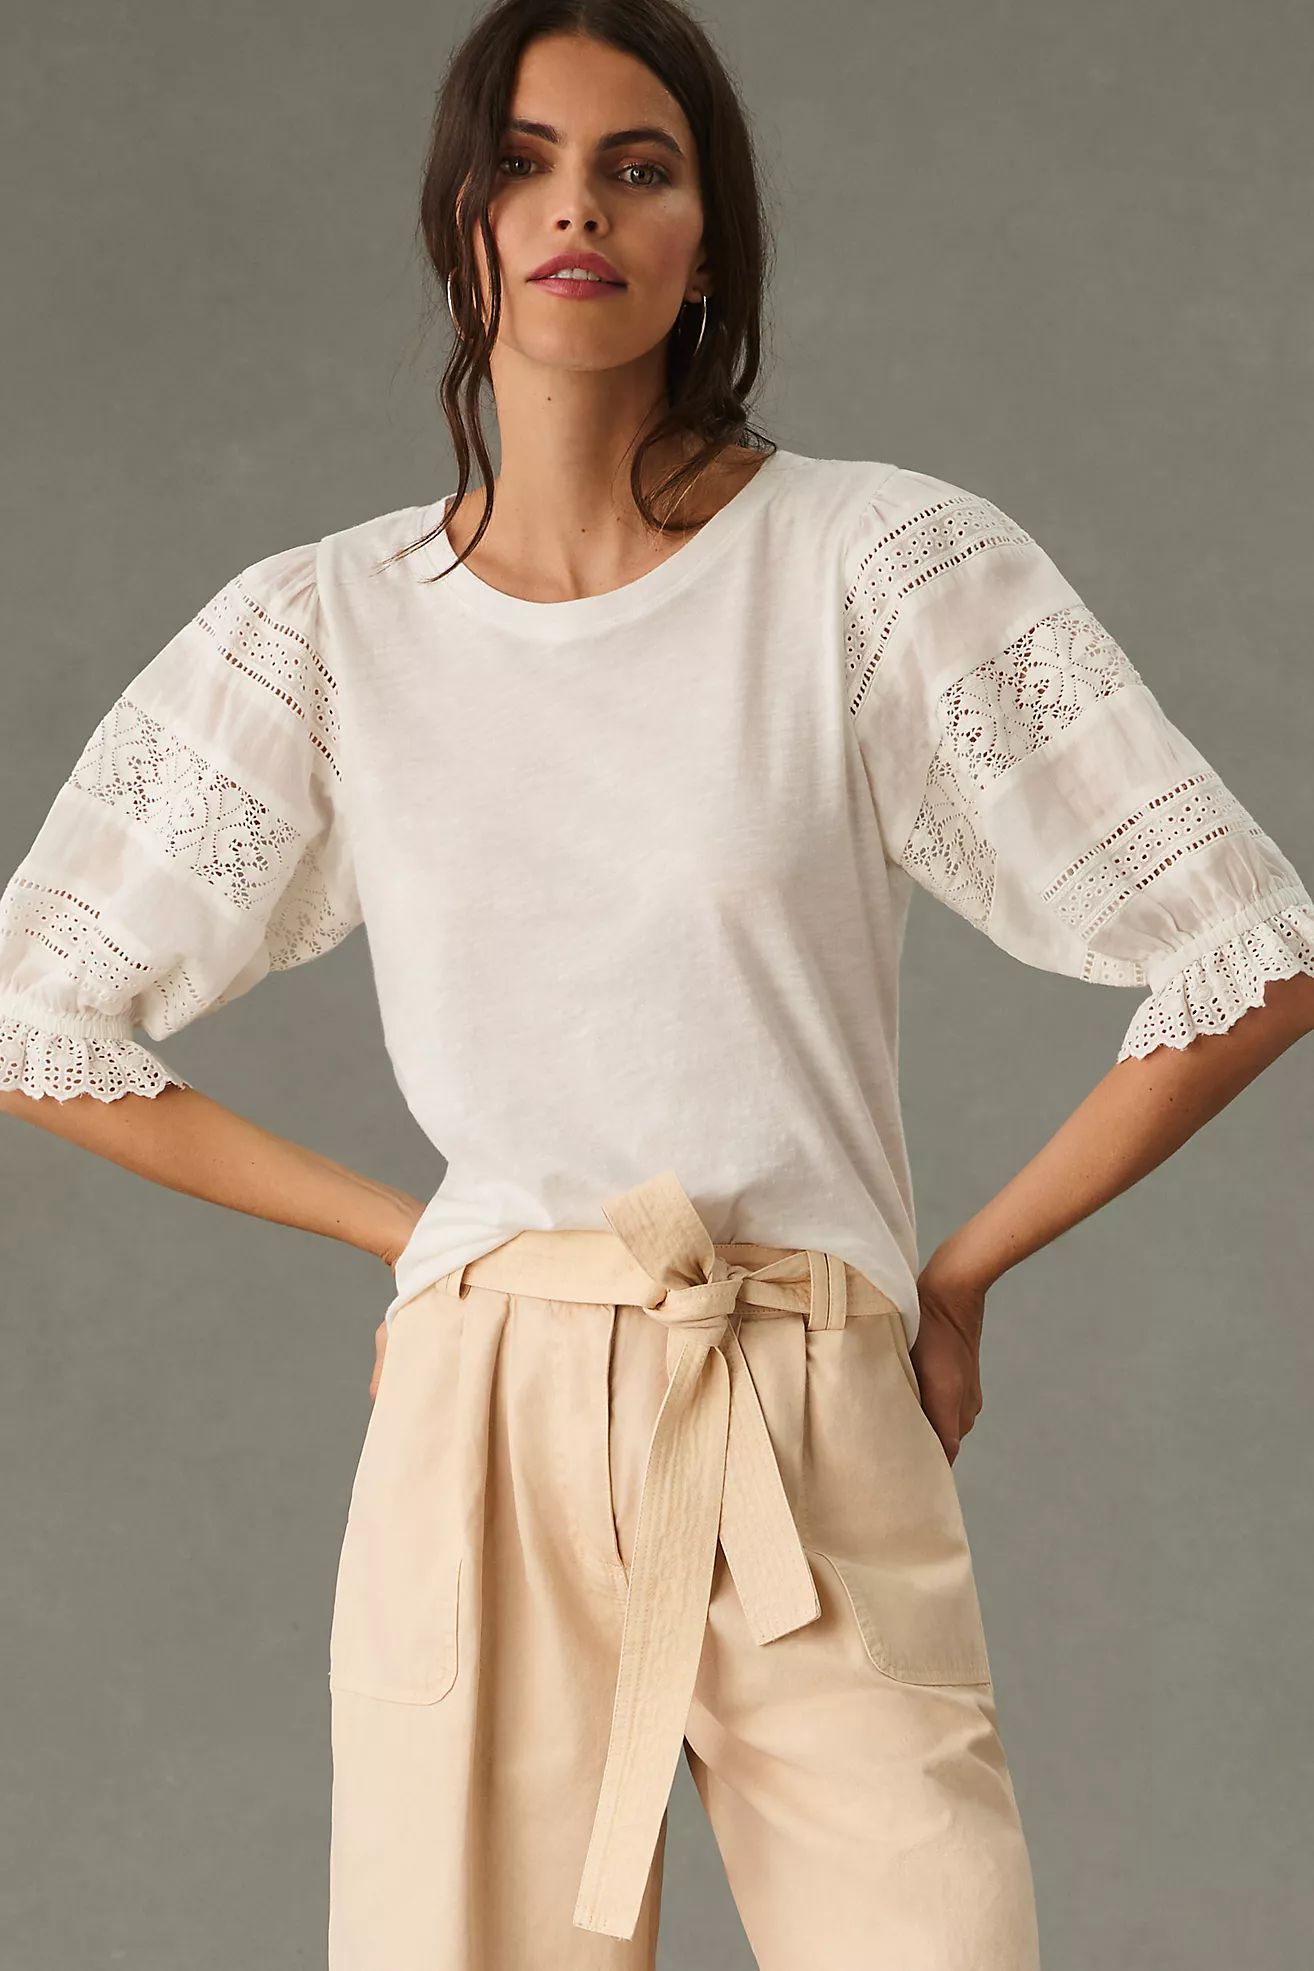 By Anthropologie Lace Applique Tee | Anthropologie (US)